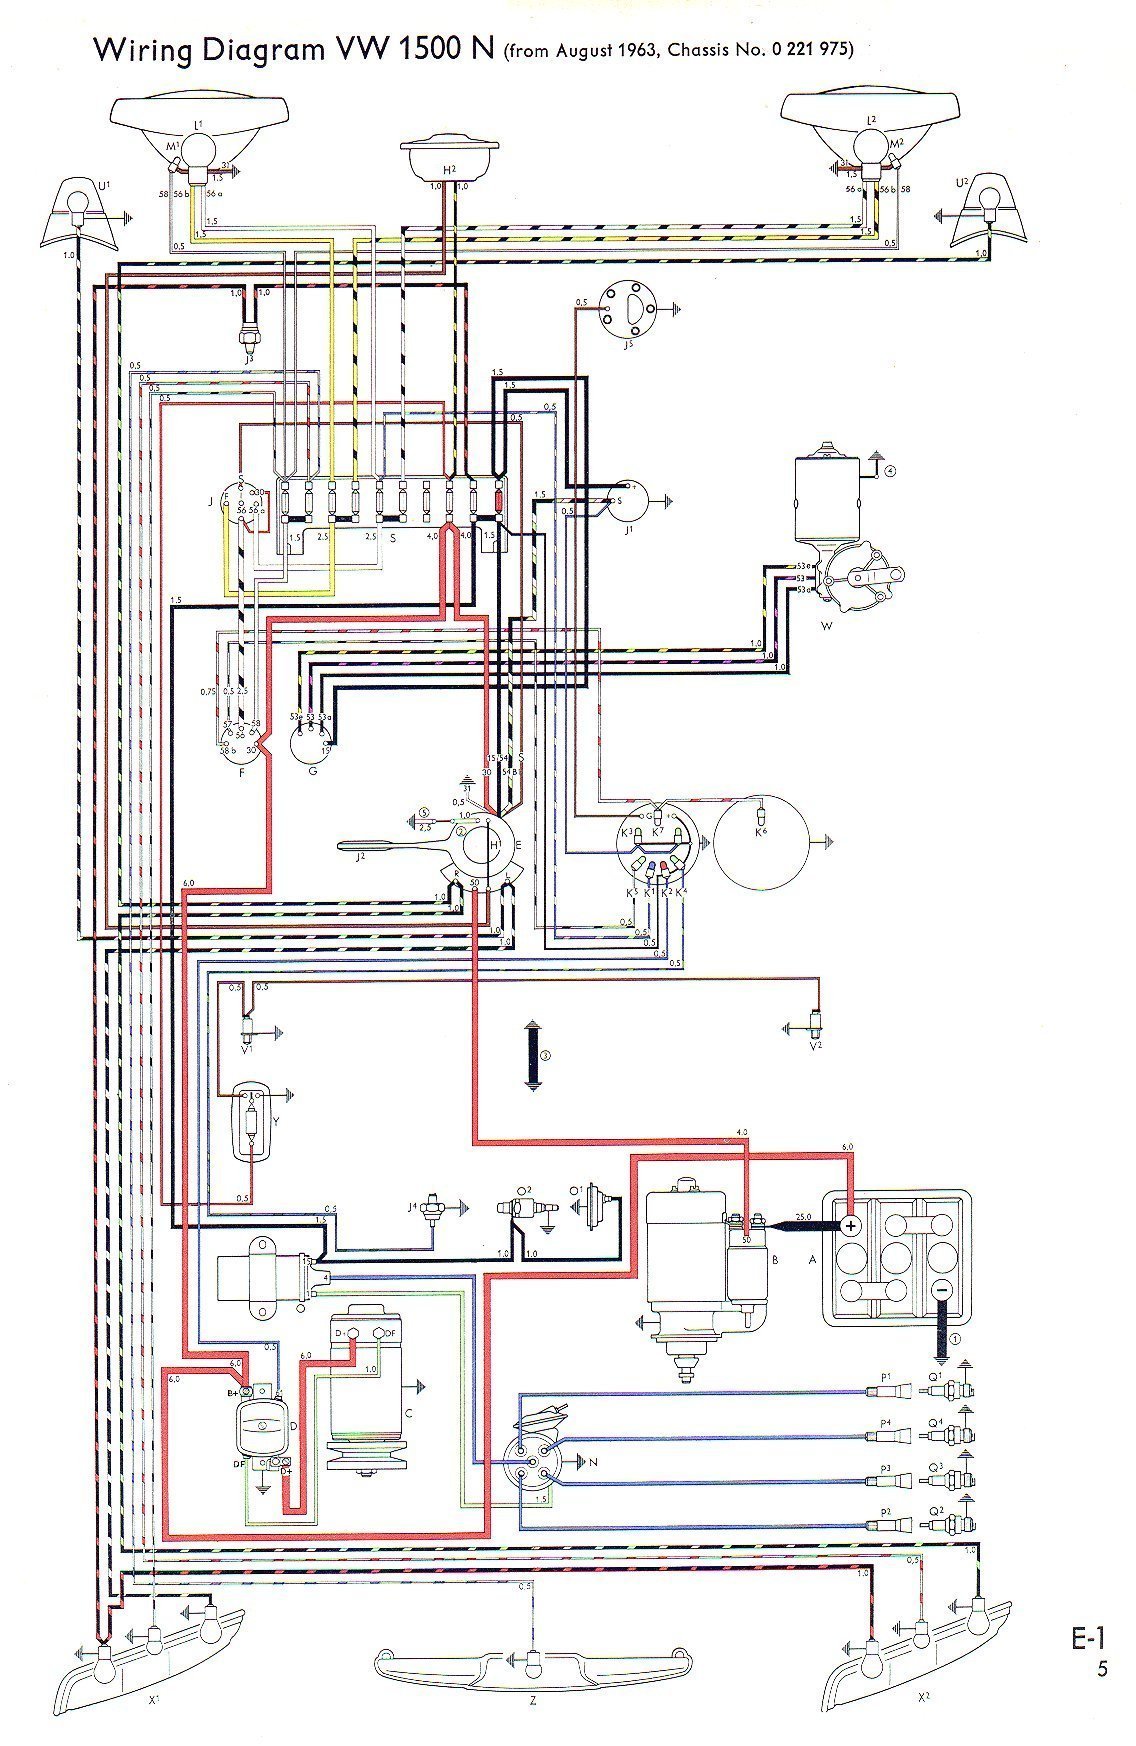 1971 Vw Super Beetle Wiring Diagram from home.clara.net